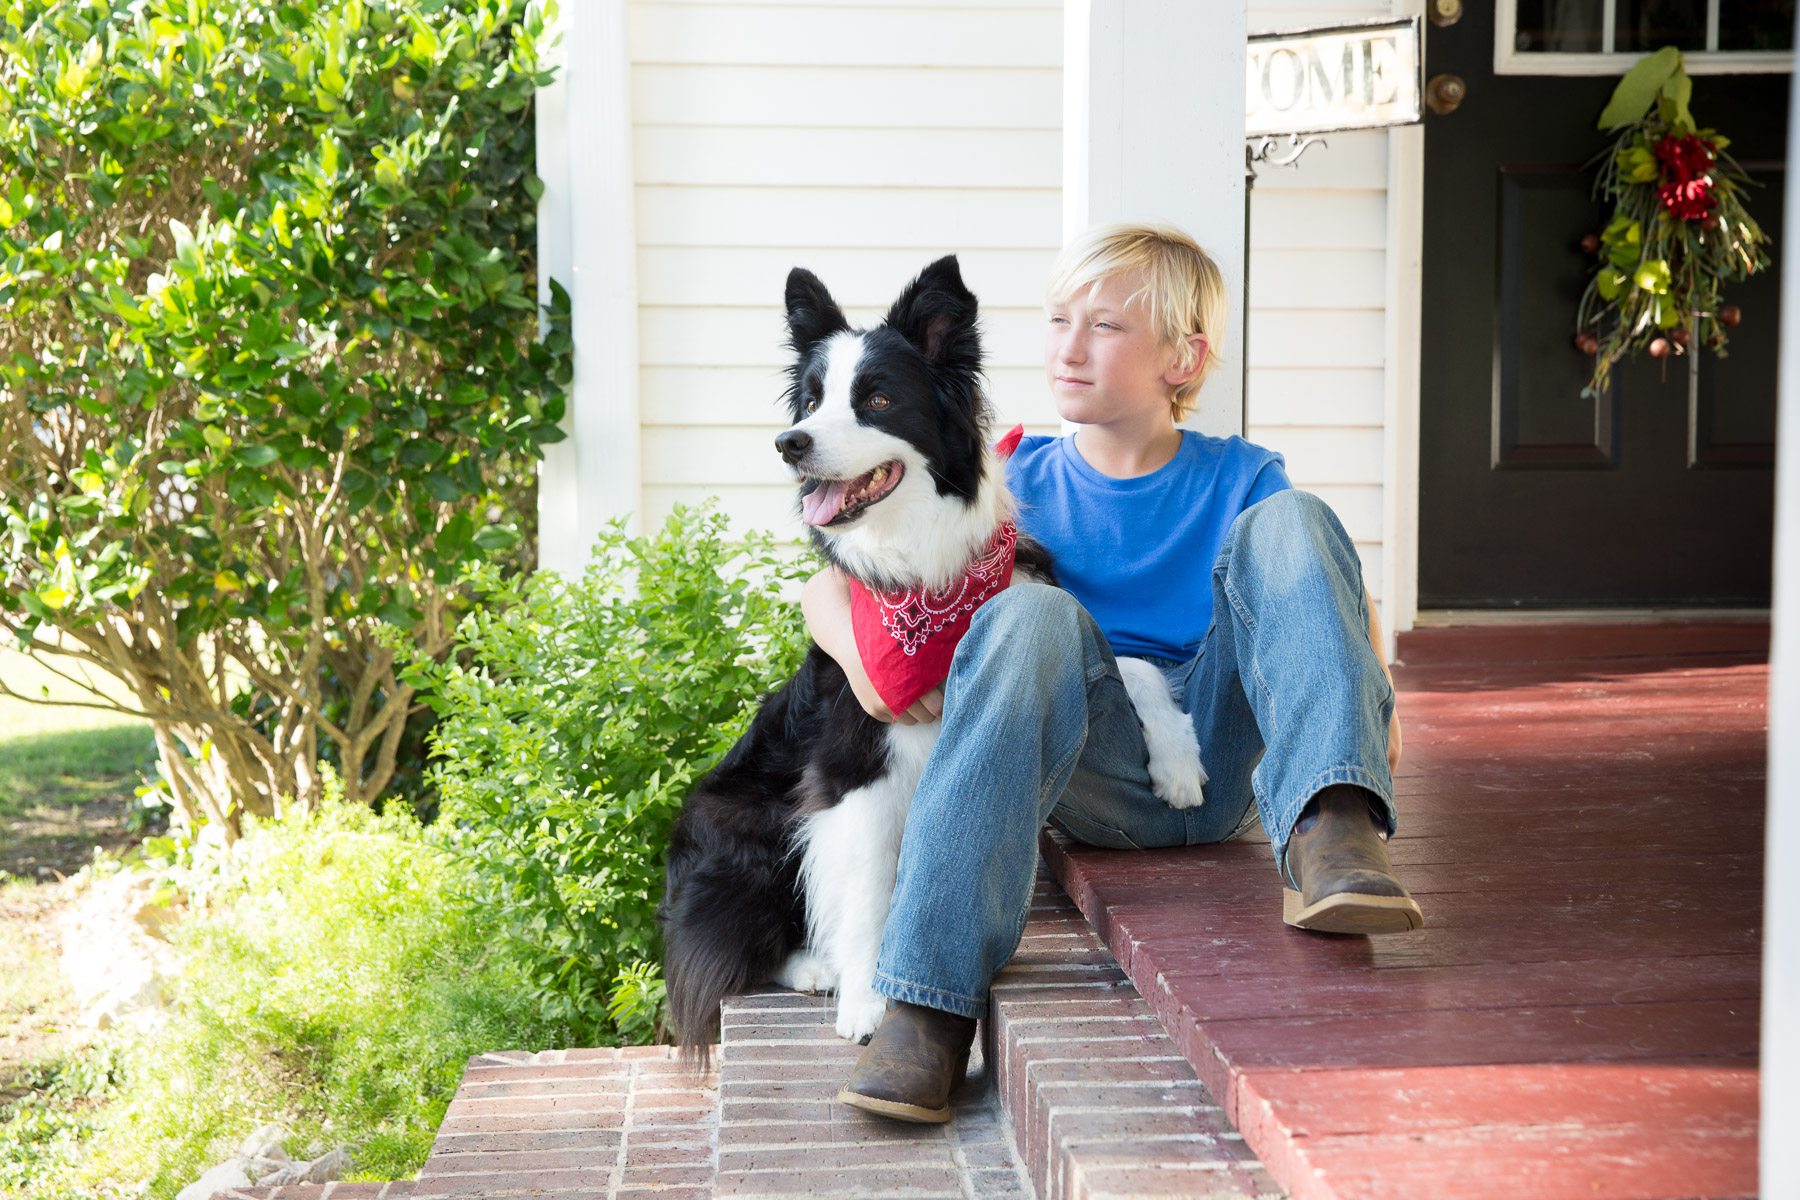 kid-with-dog-porch-outdoors-having-fun-dog-photography.jpg